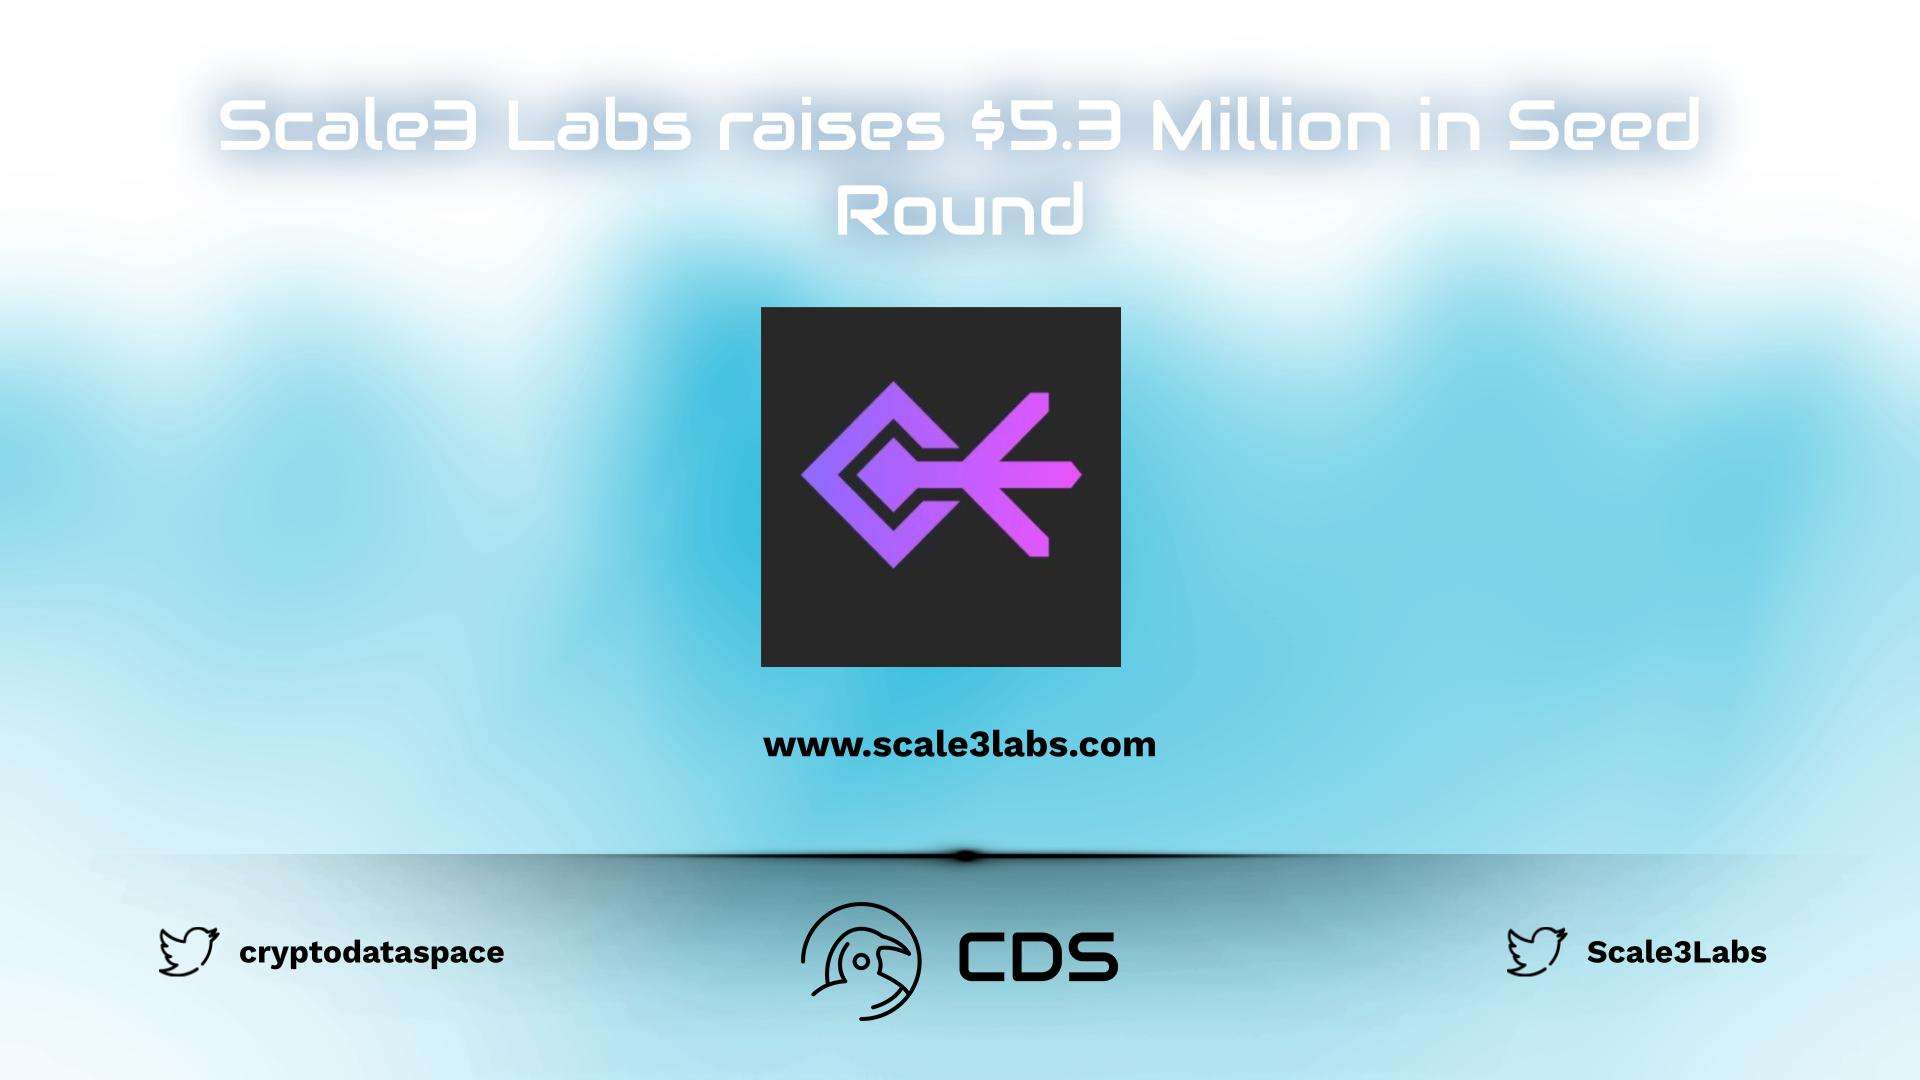 Scale3 Labs raises $5.3 Million in Seed Round